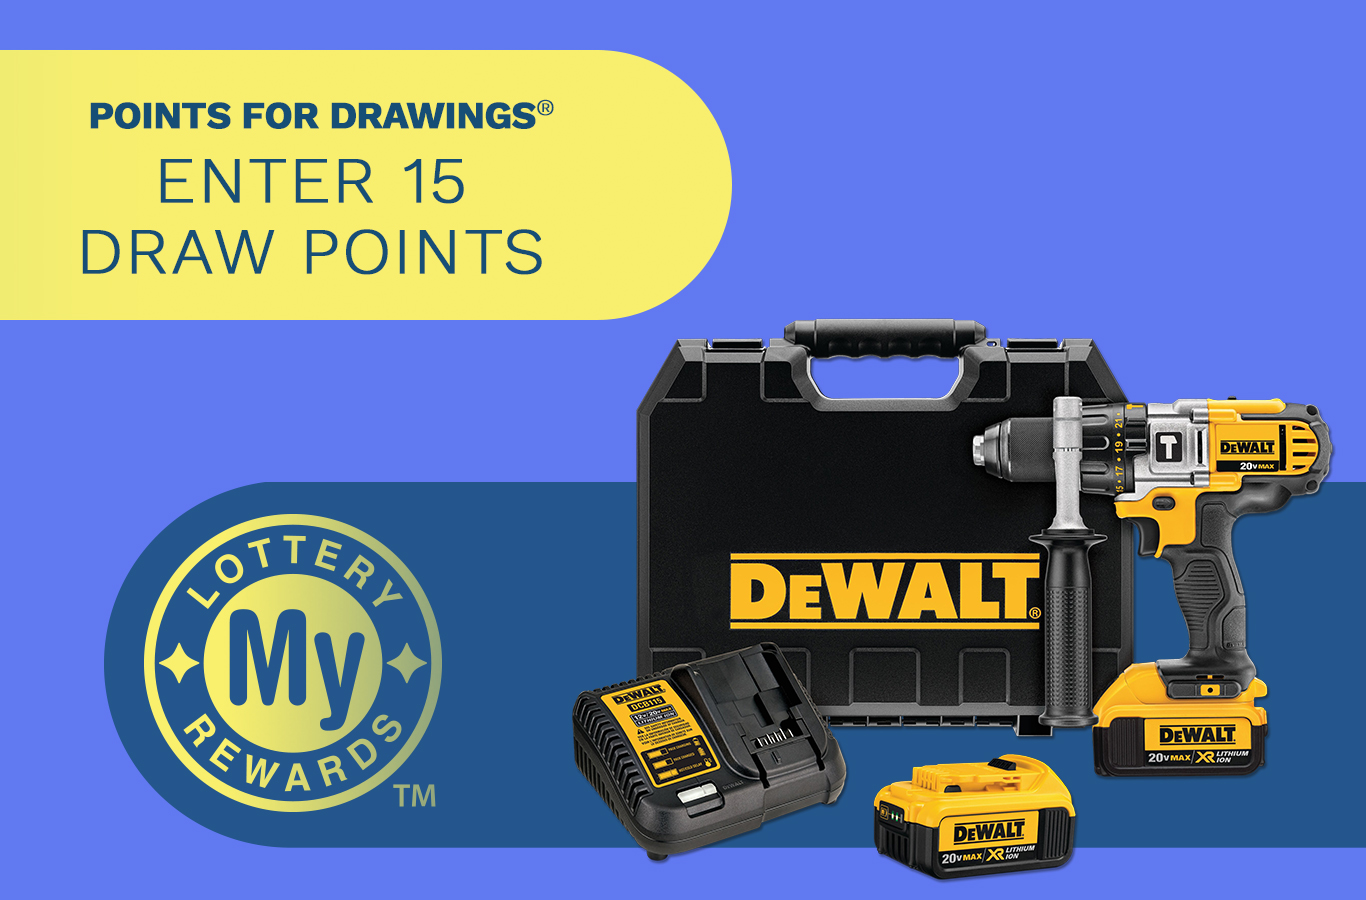 Here's your chance to win a DeWalt® Tool Kit! Enter by Tuesday, August 9th.